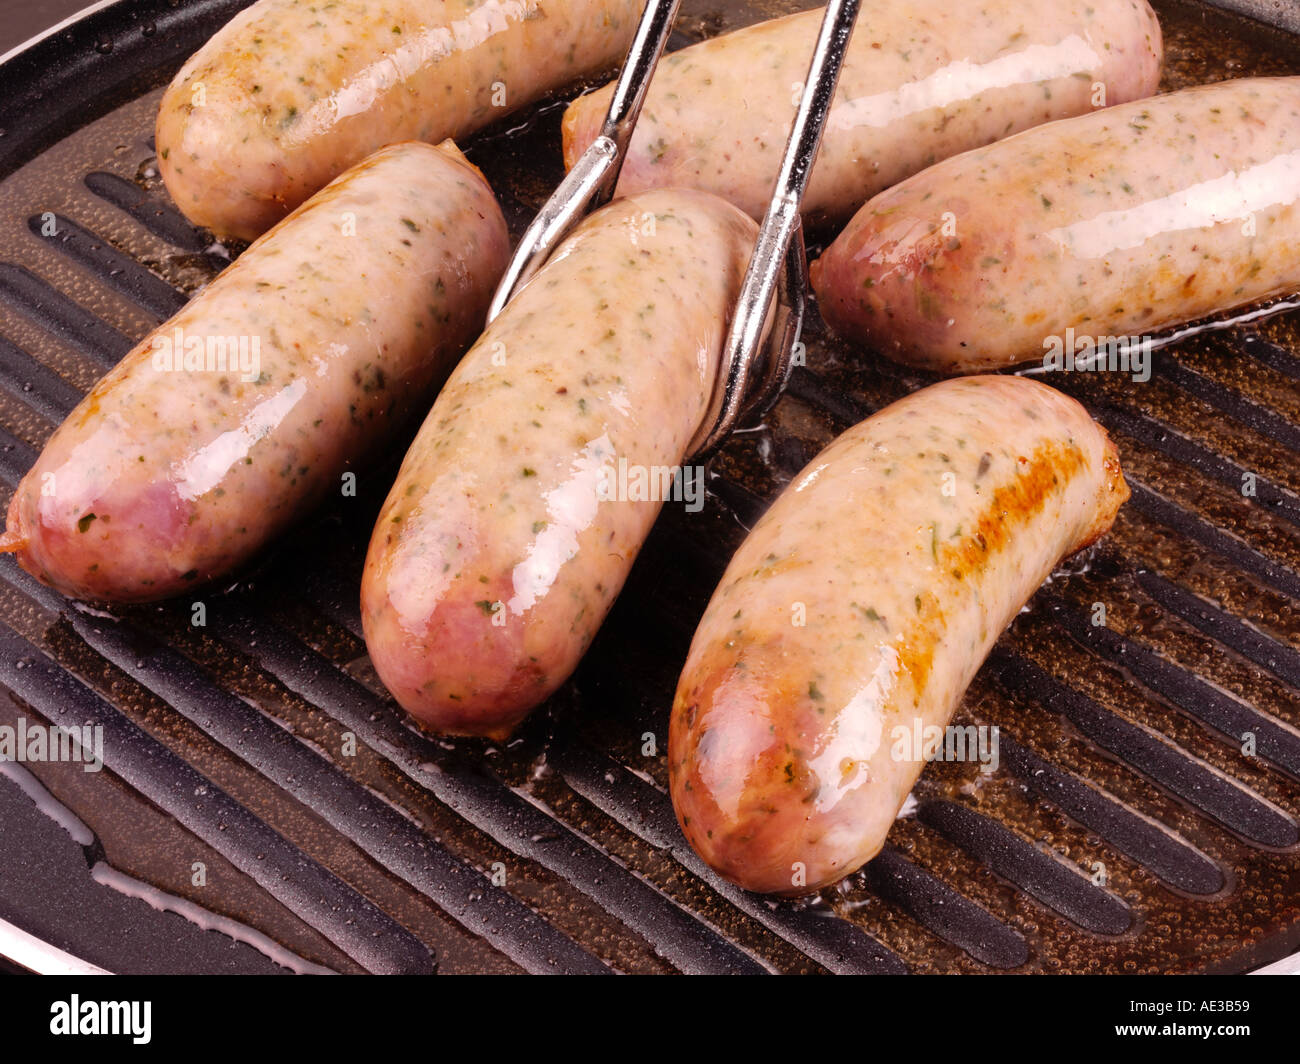 COOKING SAUSAGES Stock Photo